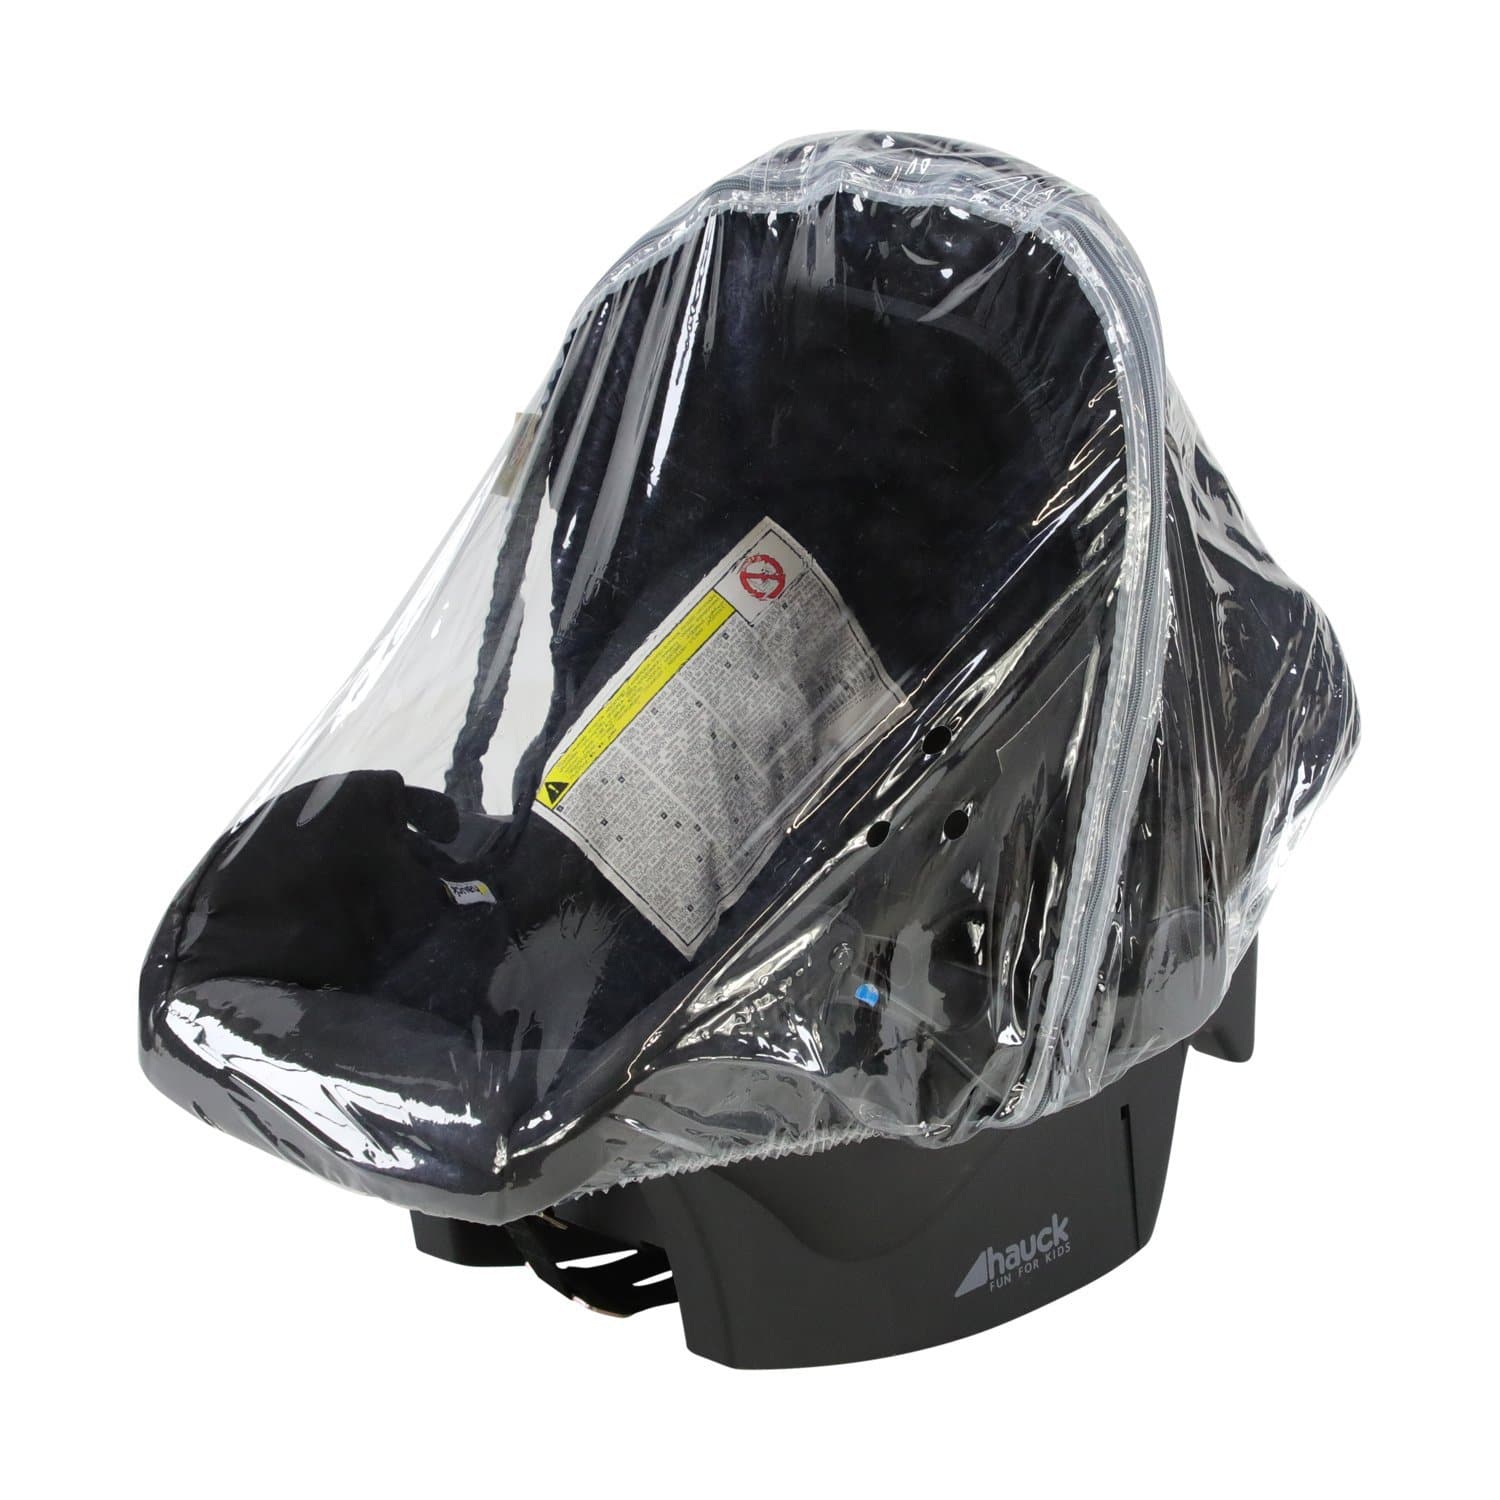 Car Seat Raincover Compatible with Mountain Buggy - For Your Little One